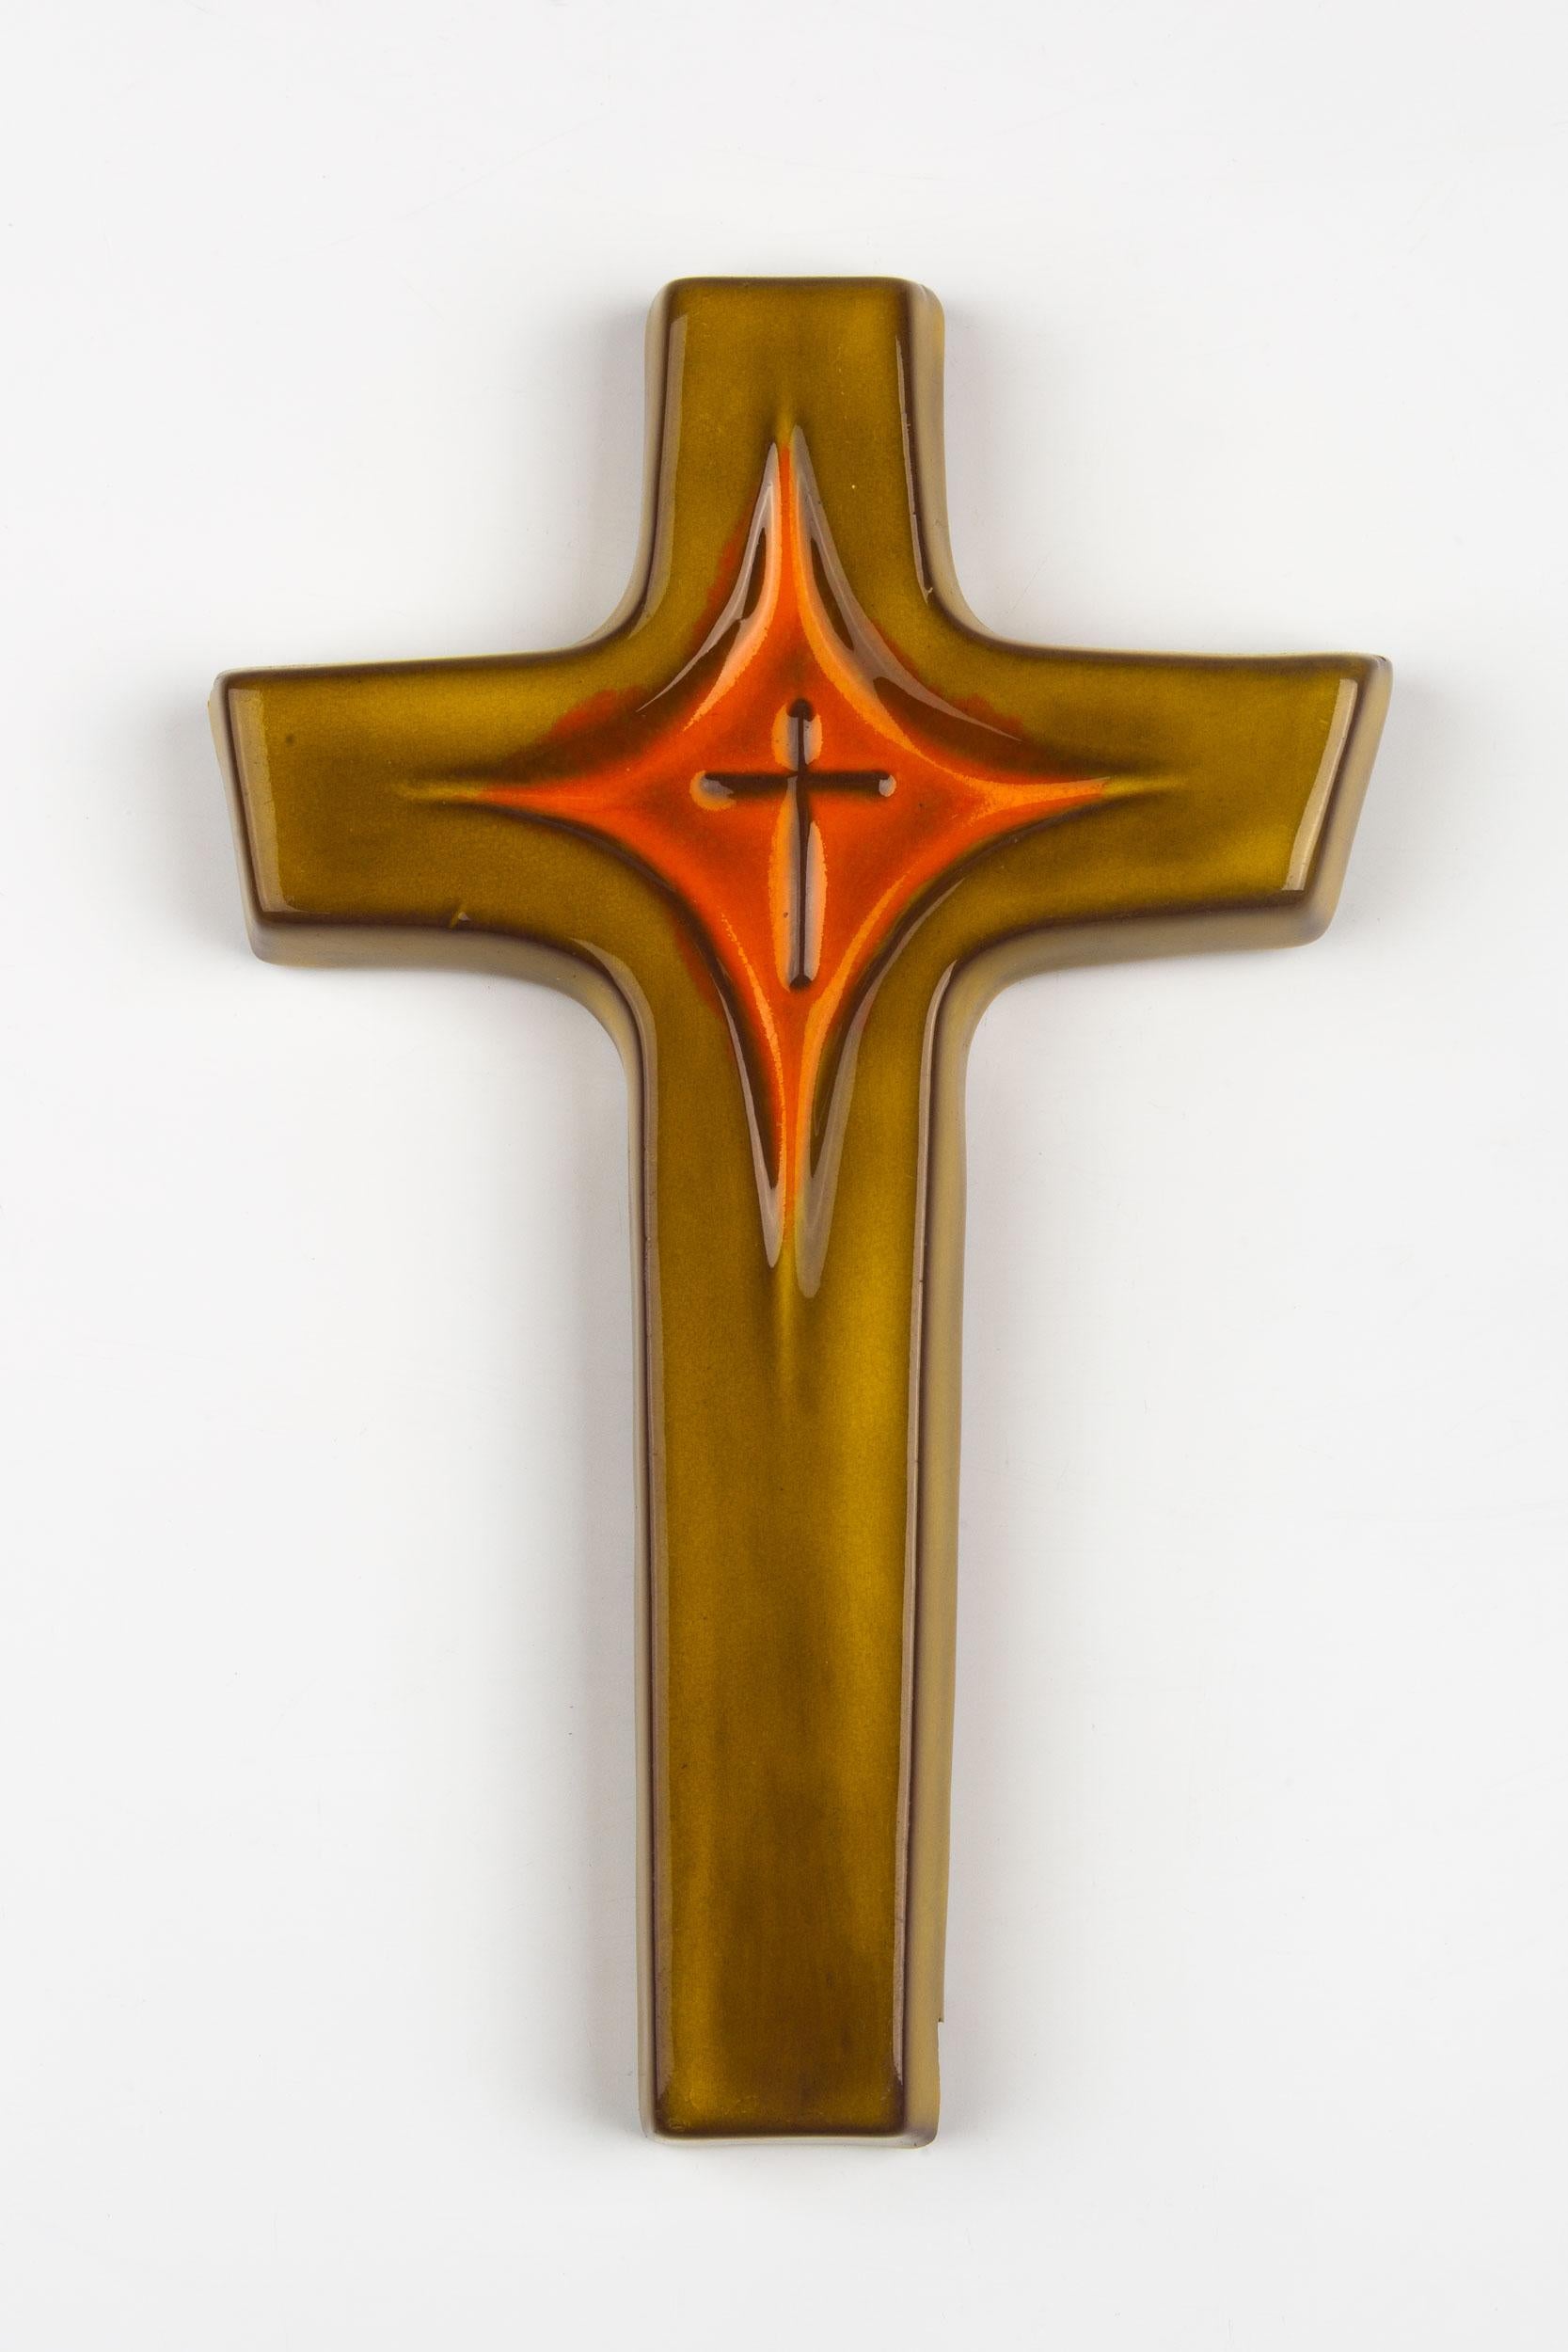 Midcentury European Wall Cross, Green, Orange, Glazed Ceramic, Handmade, 1970 In Good Condition For Sale In Chicago, IL